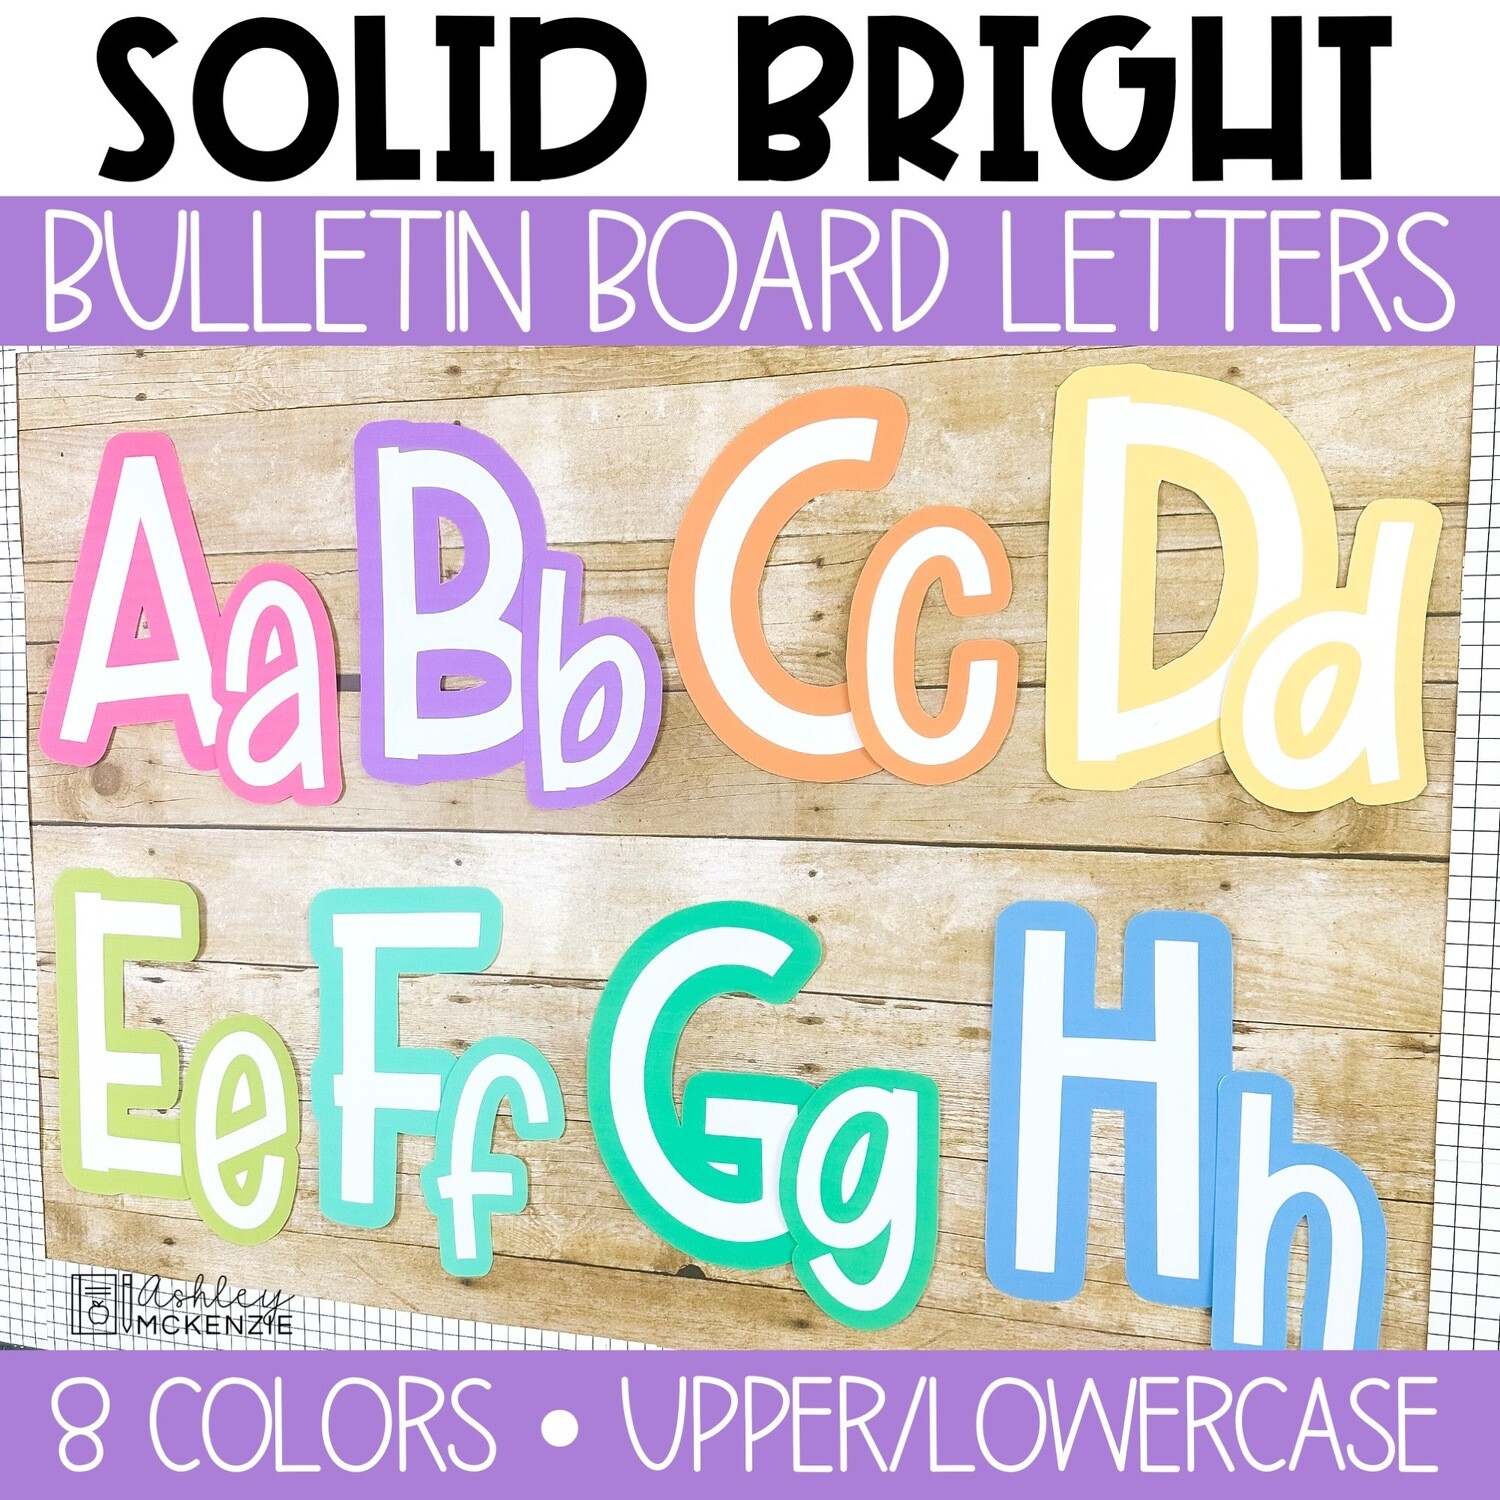 Cursive Alphabet Letters for Wall Decoration or Bulletin Board Titles